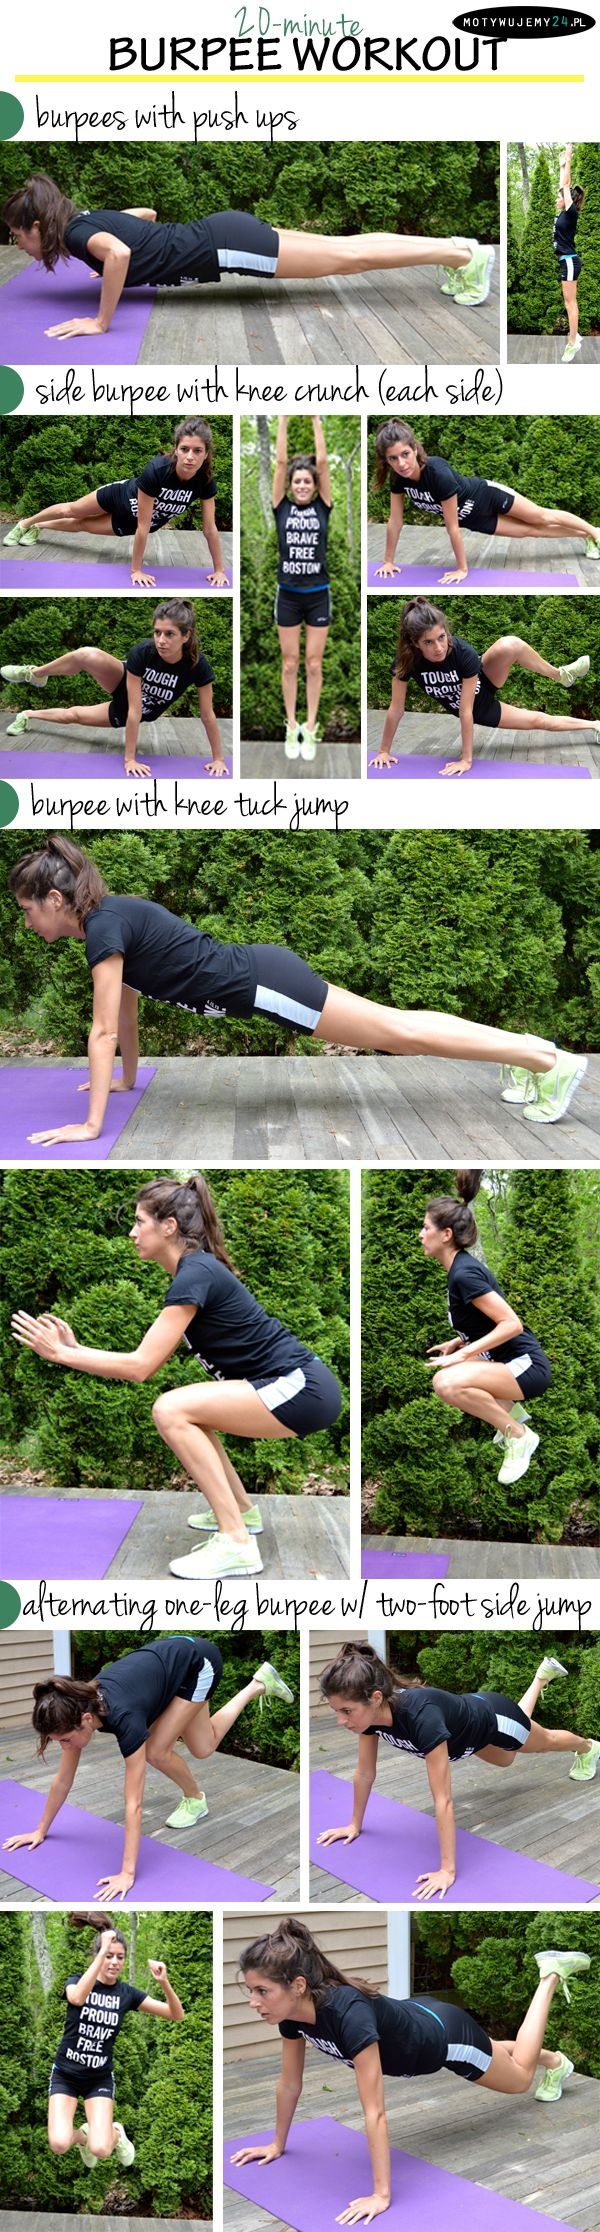 Burpees workout